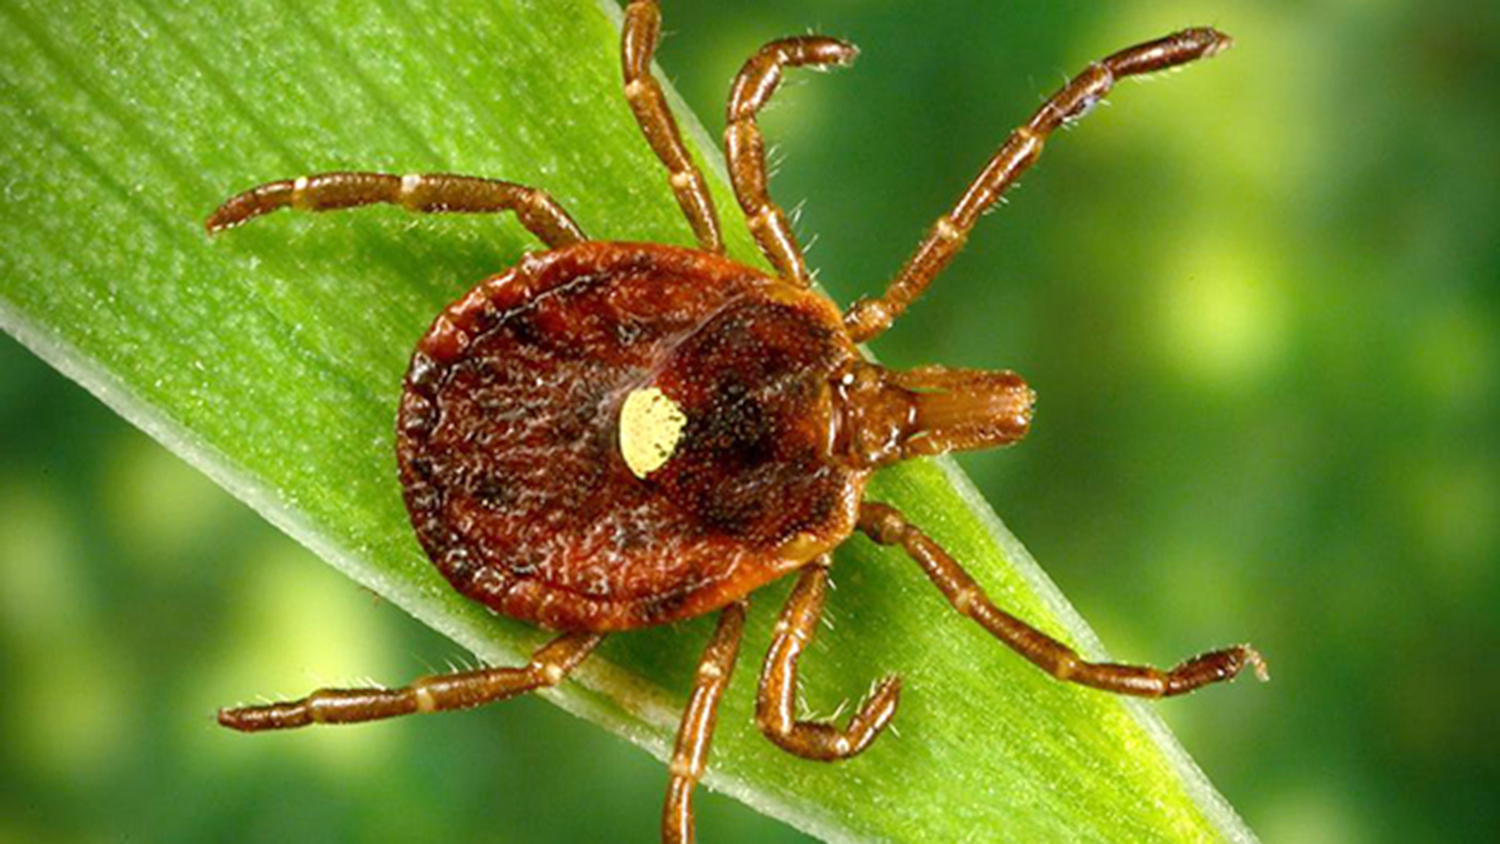 Lone Star ticks have become the dominant tick species on the East End, transmitting various diseases including the alpa gal meat allergy.